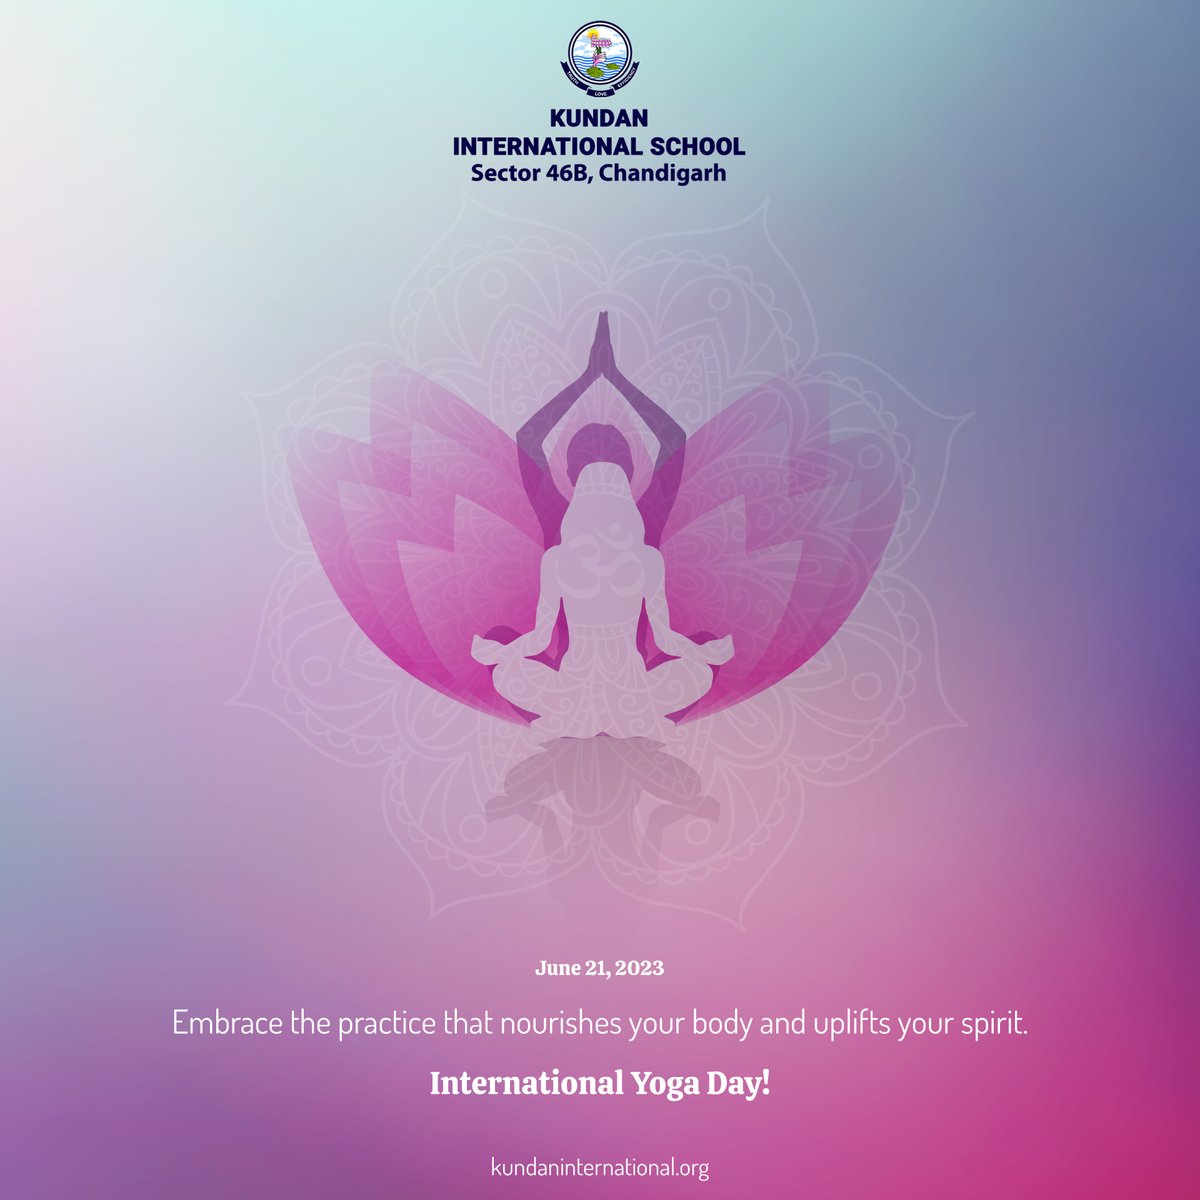 🧘‍♂️On this International Yoga Day, let's honour the practice that has brought us so much strength, flexibility, balance and inner peace 🙌

#InternationalYogaDay #StressRelief #KundanInternationalSchool #SchoolInChandigarh #Education #SchoolSpirit